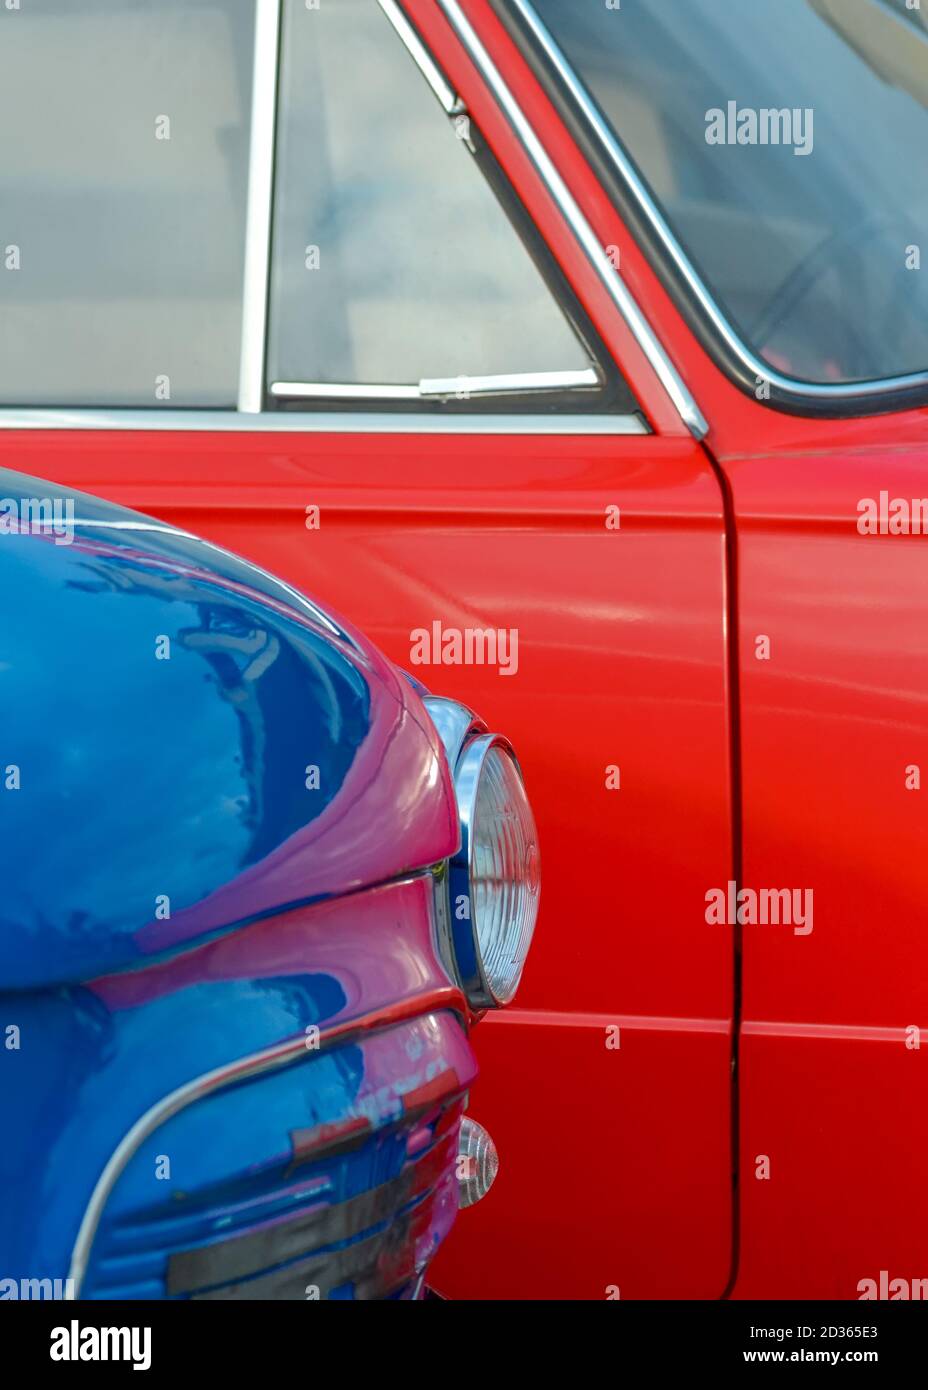 Headlight of a blue vintage car on the background of a red car close-up Stock Photo